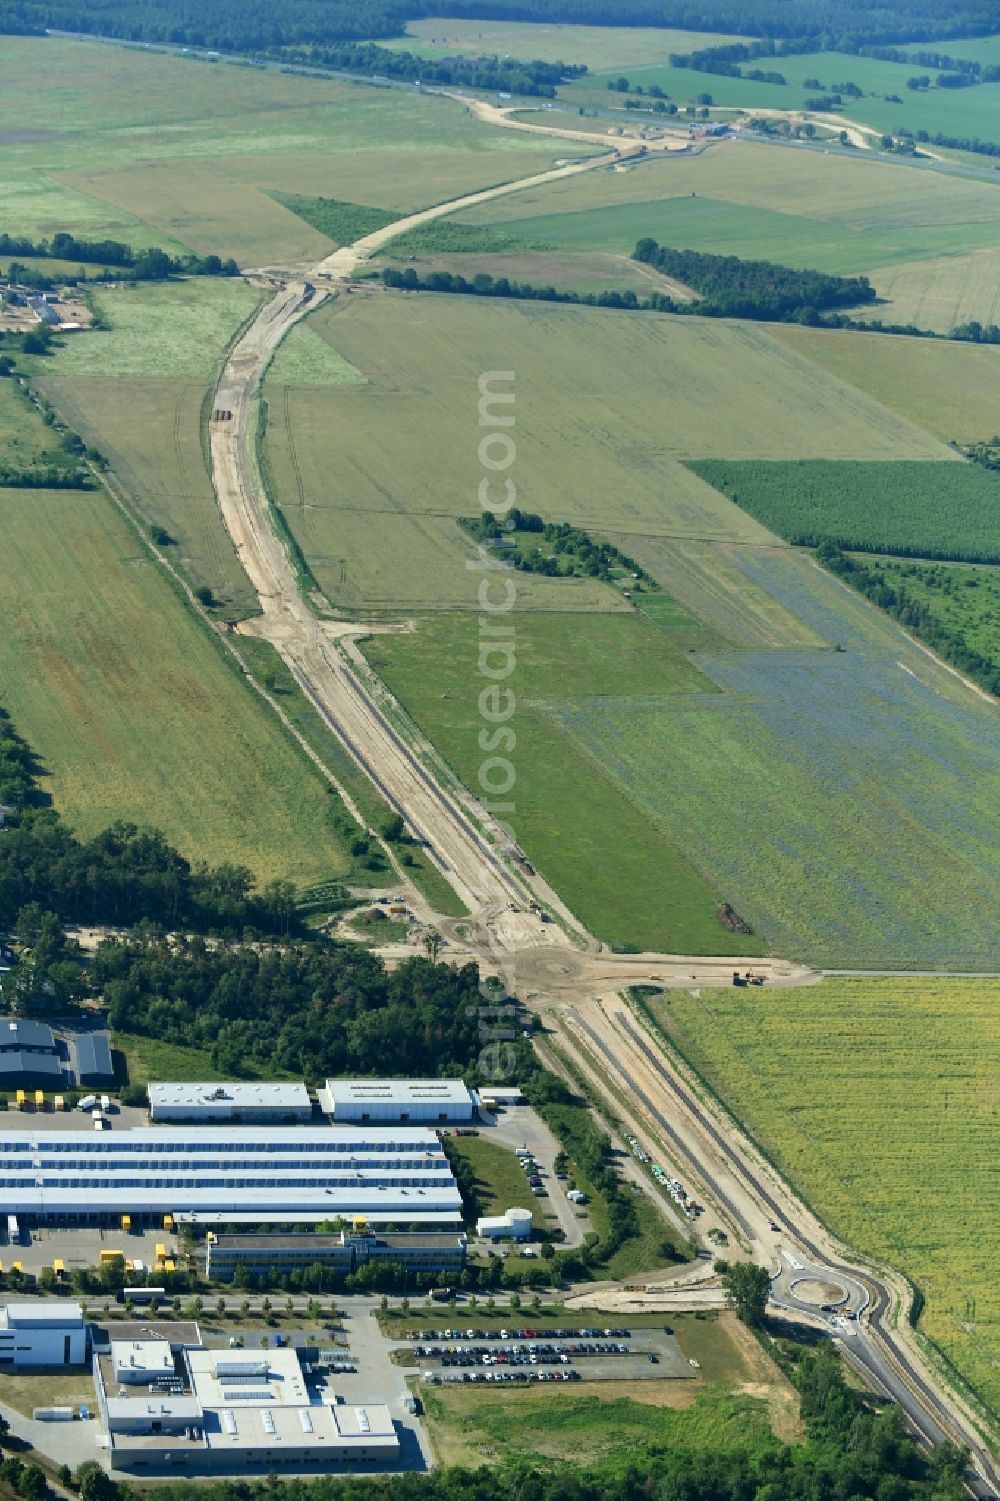 Stahnsdorf from the bird's eye view: Construction of the bypass road L77 n in the district Gueterfelde in Stahnsdorf in the state Brandenburg, Germany